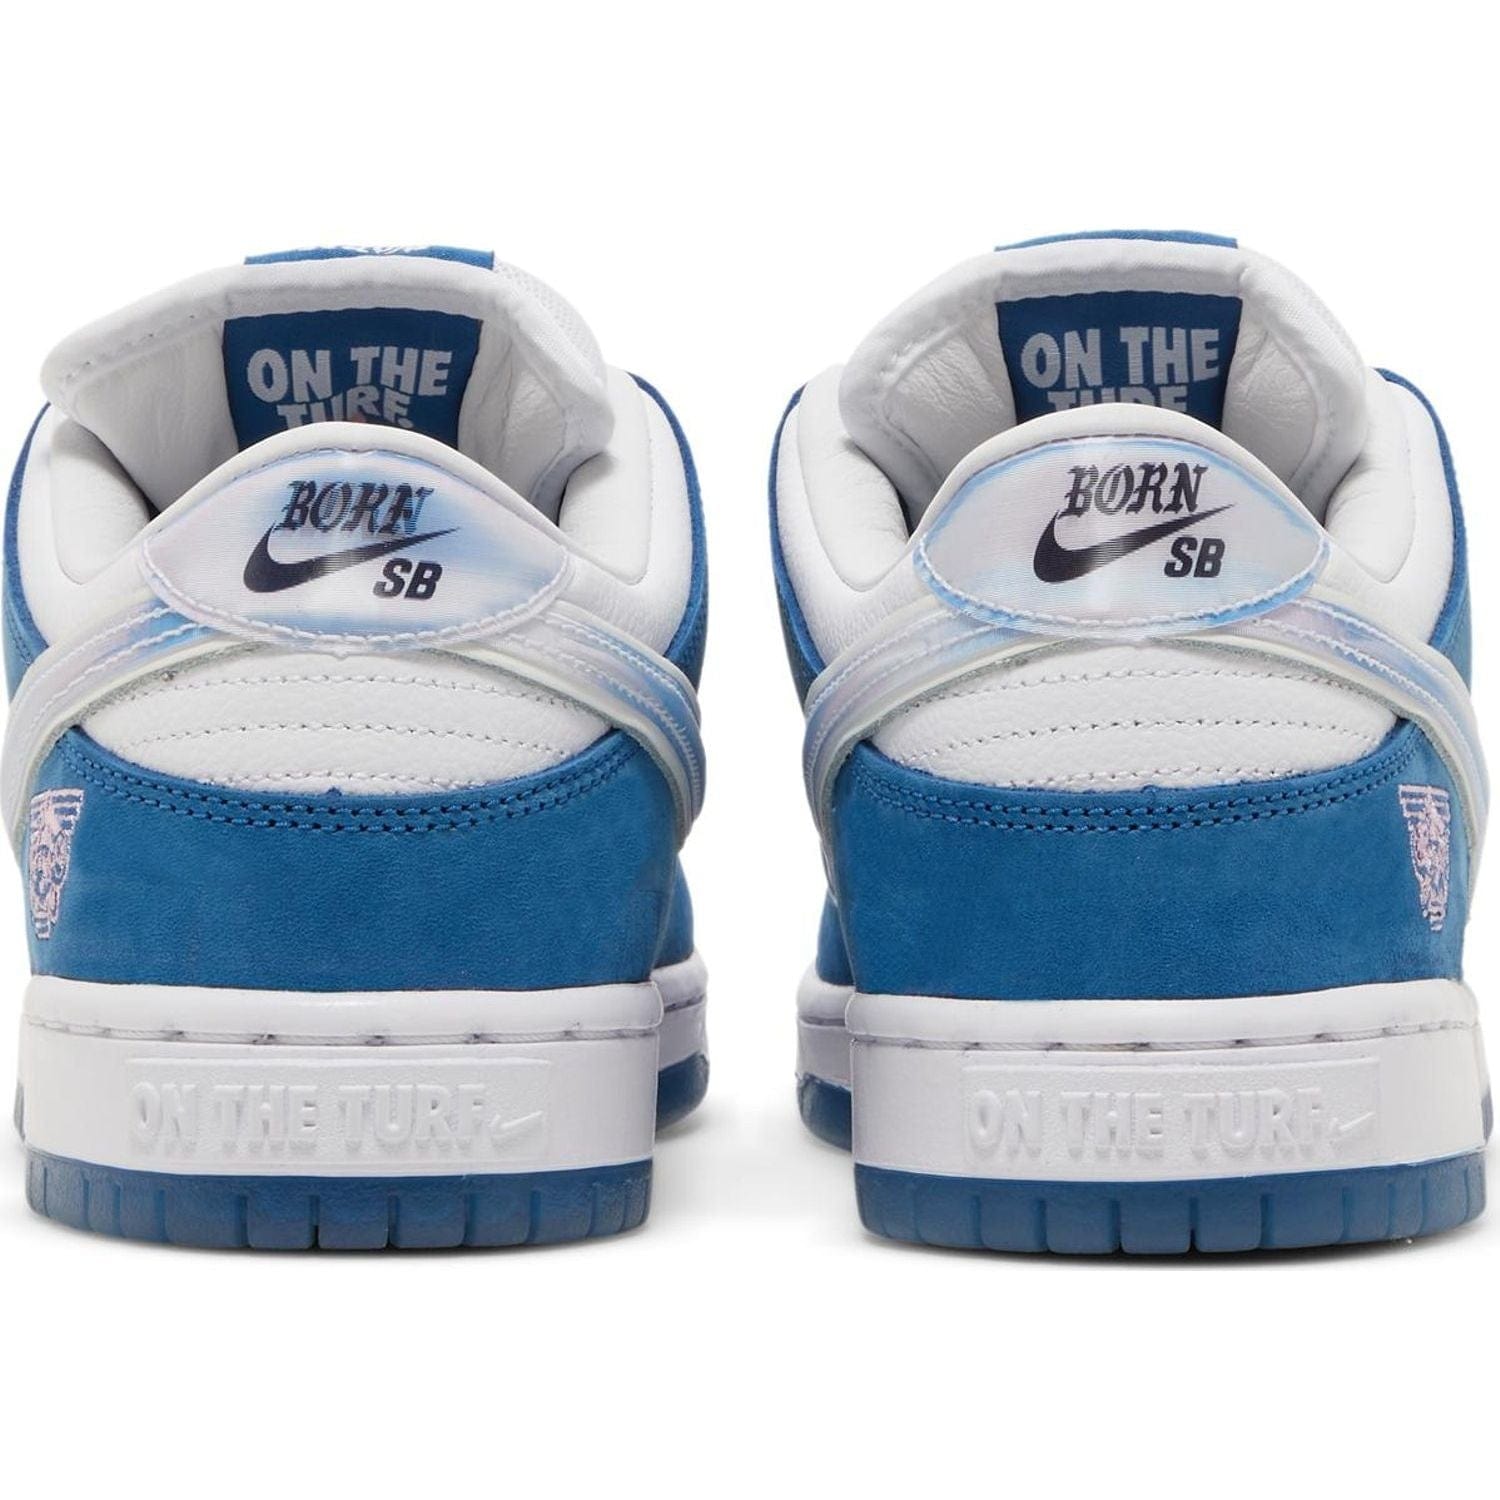 Nike SB Dunk Low Born X Raised One Block At A Time Nike